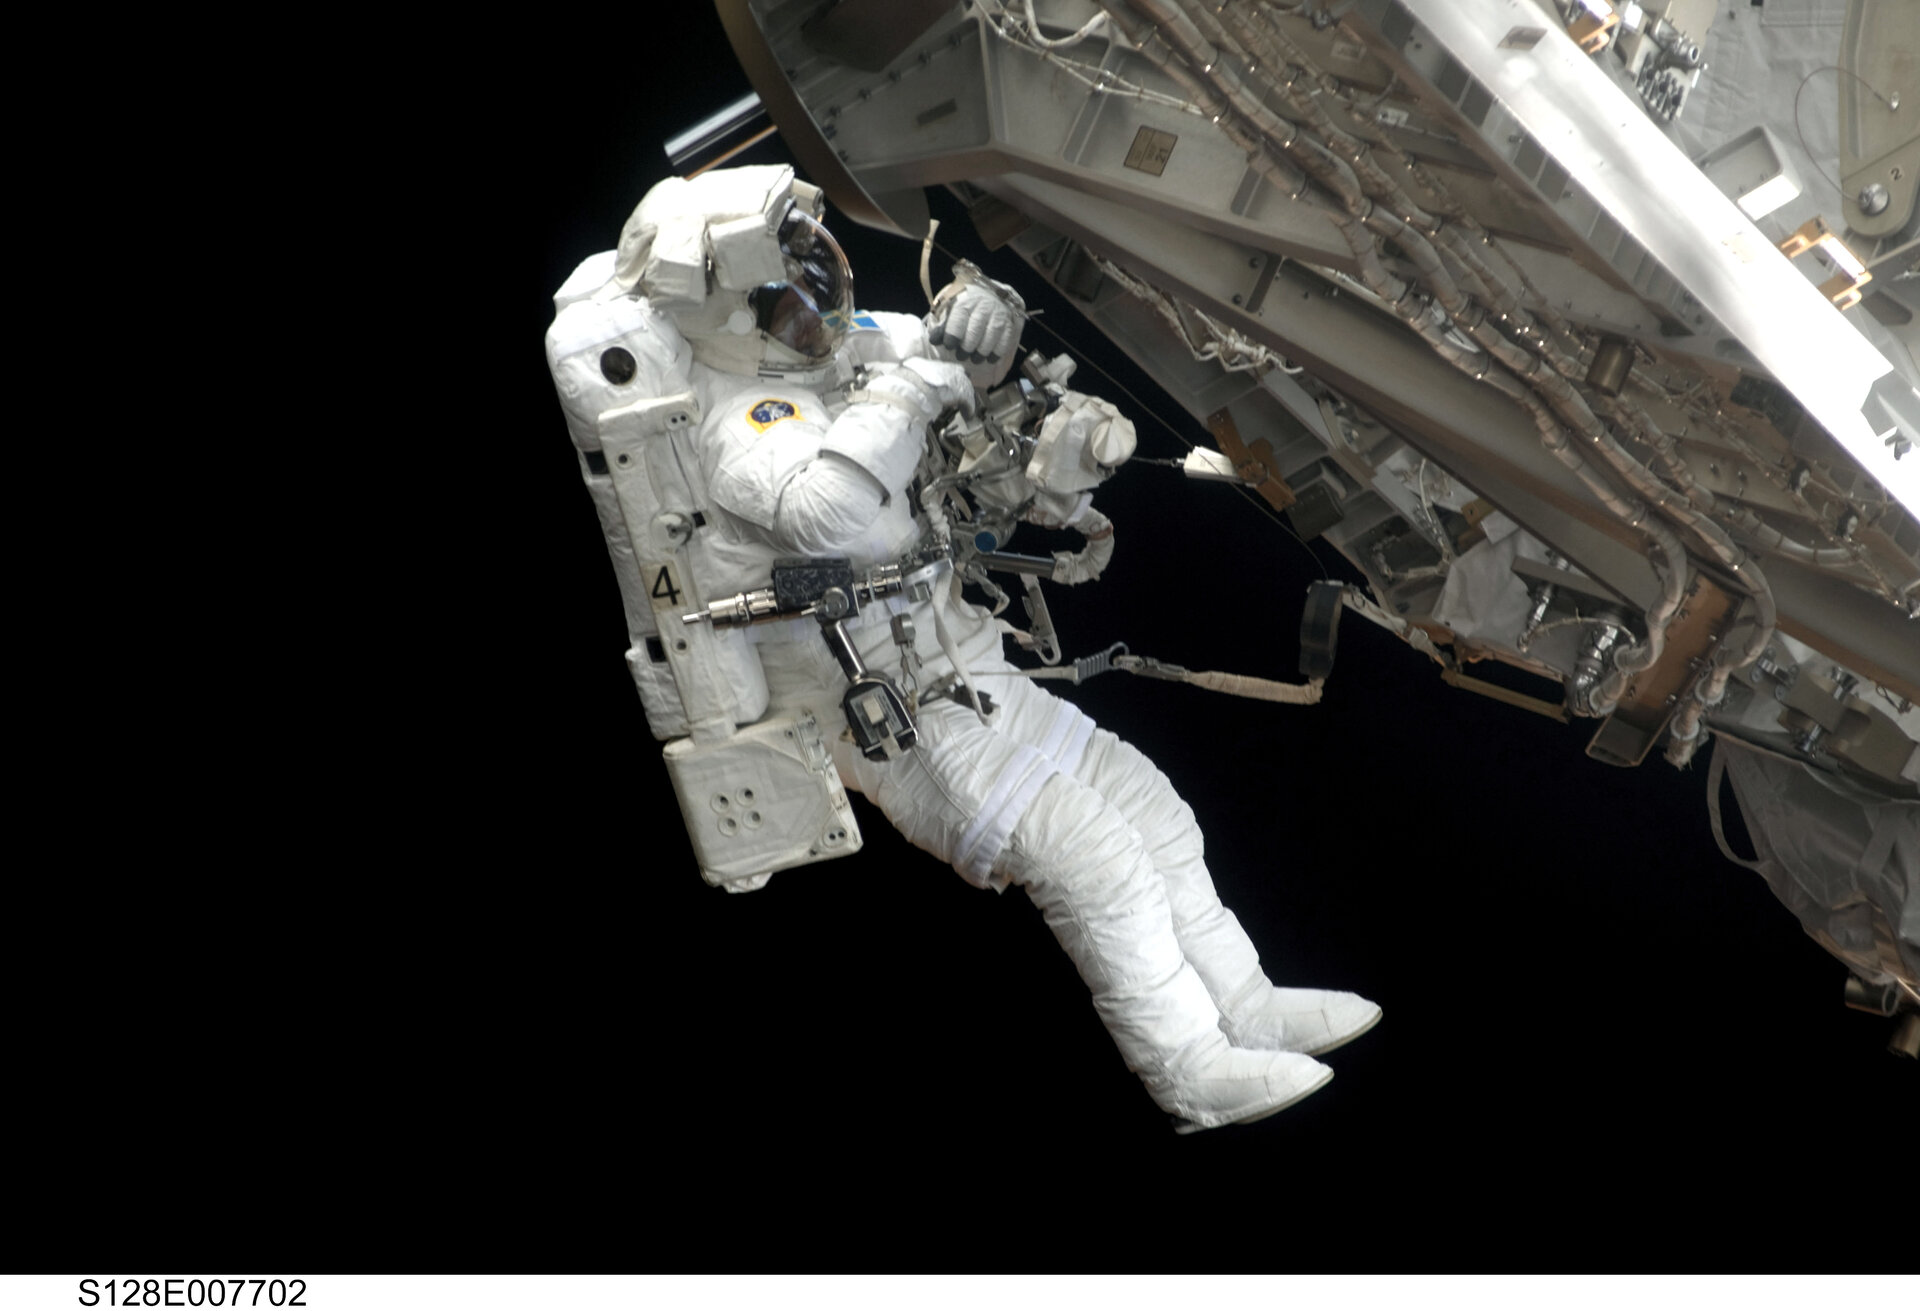 Christer Fuglesang participates in the third STS-128 spacewalk outside the ISS